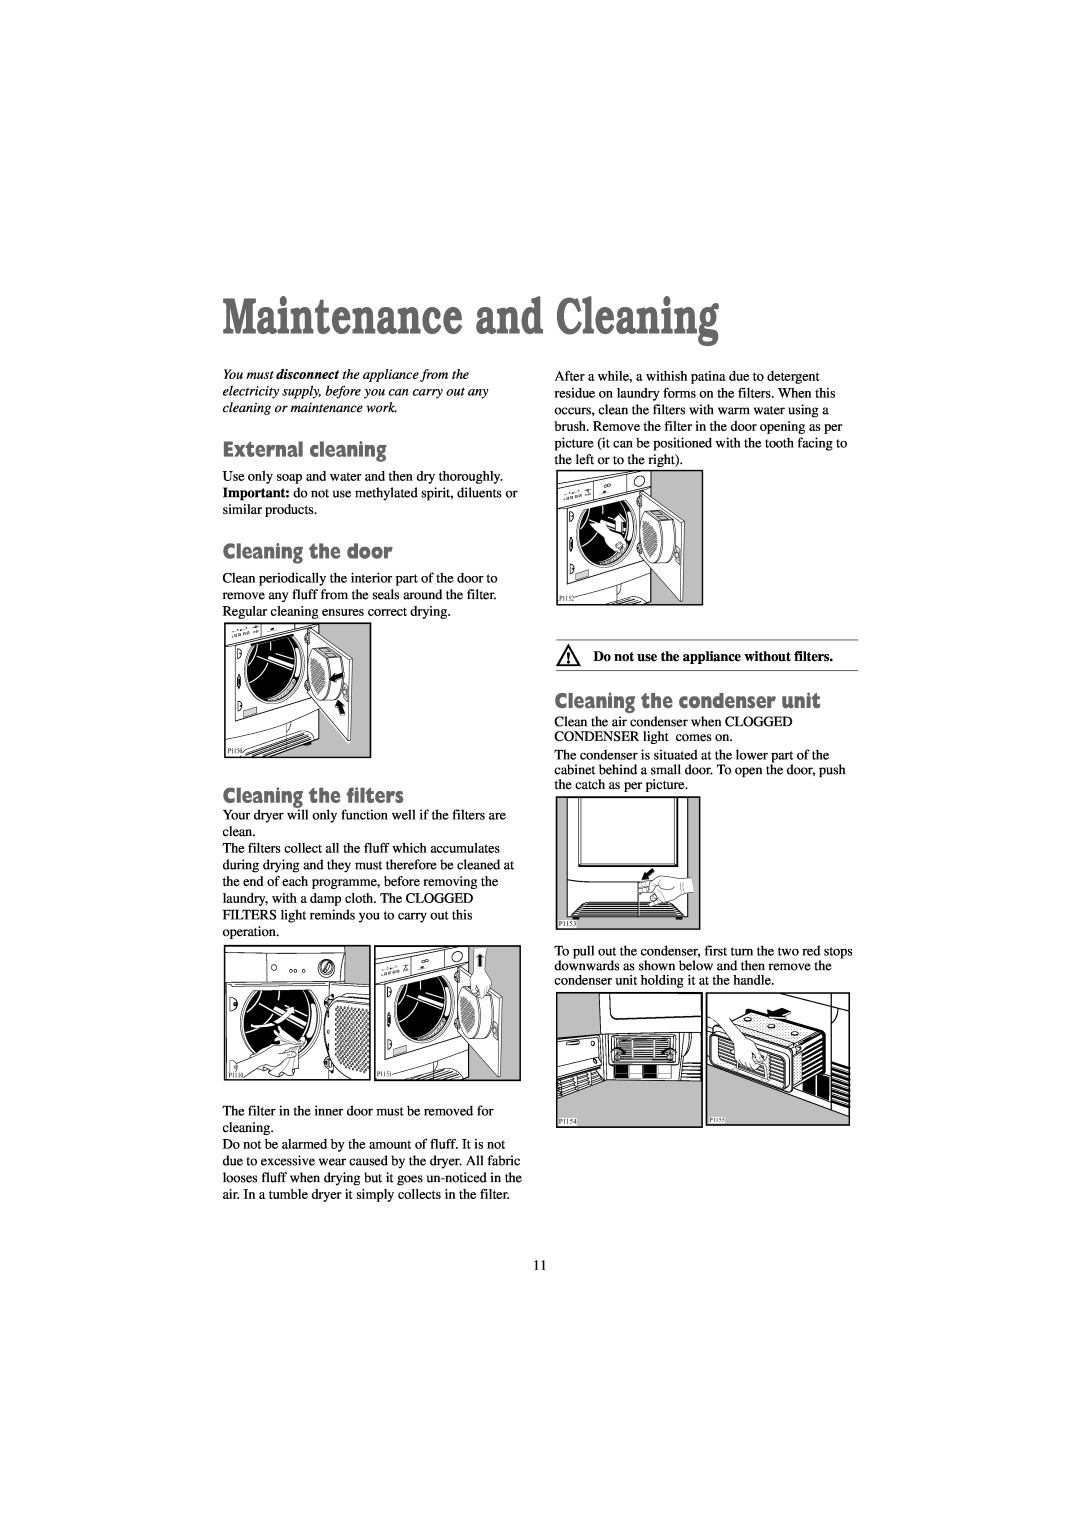 Zanussi TCE 7276 W manual Maintenance and Cleaning, External cleaning, Cleaning the door, Cleaning the filters 